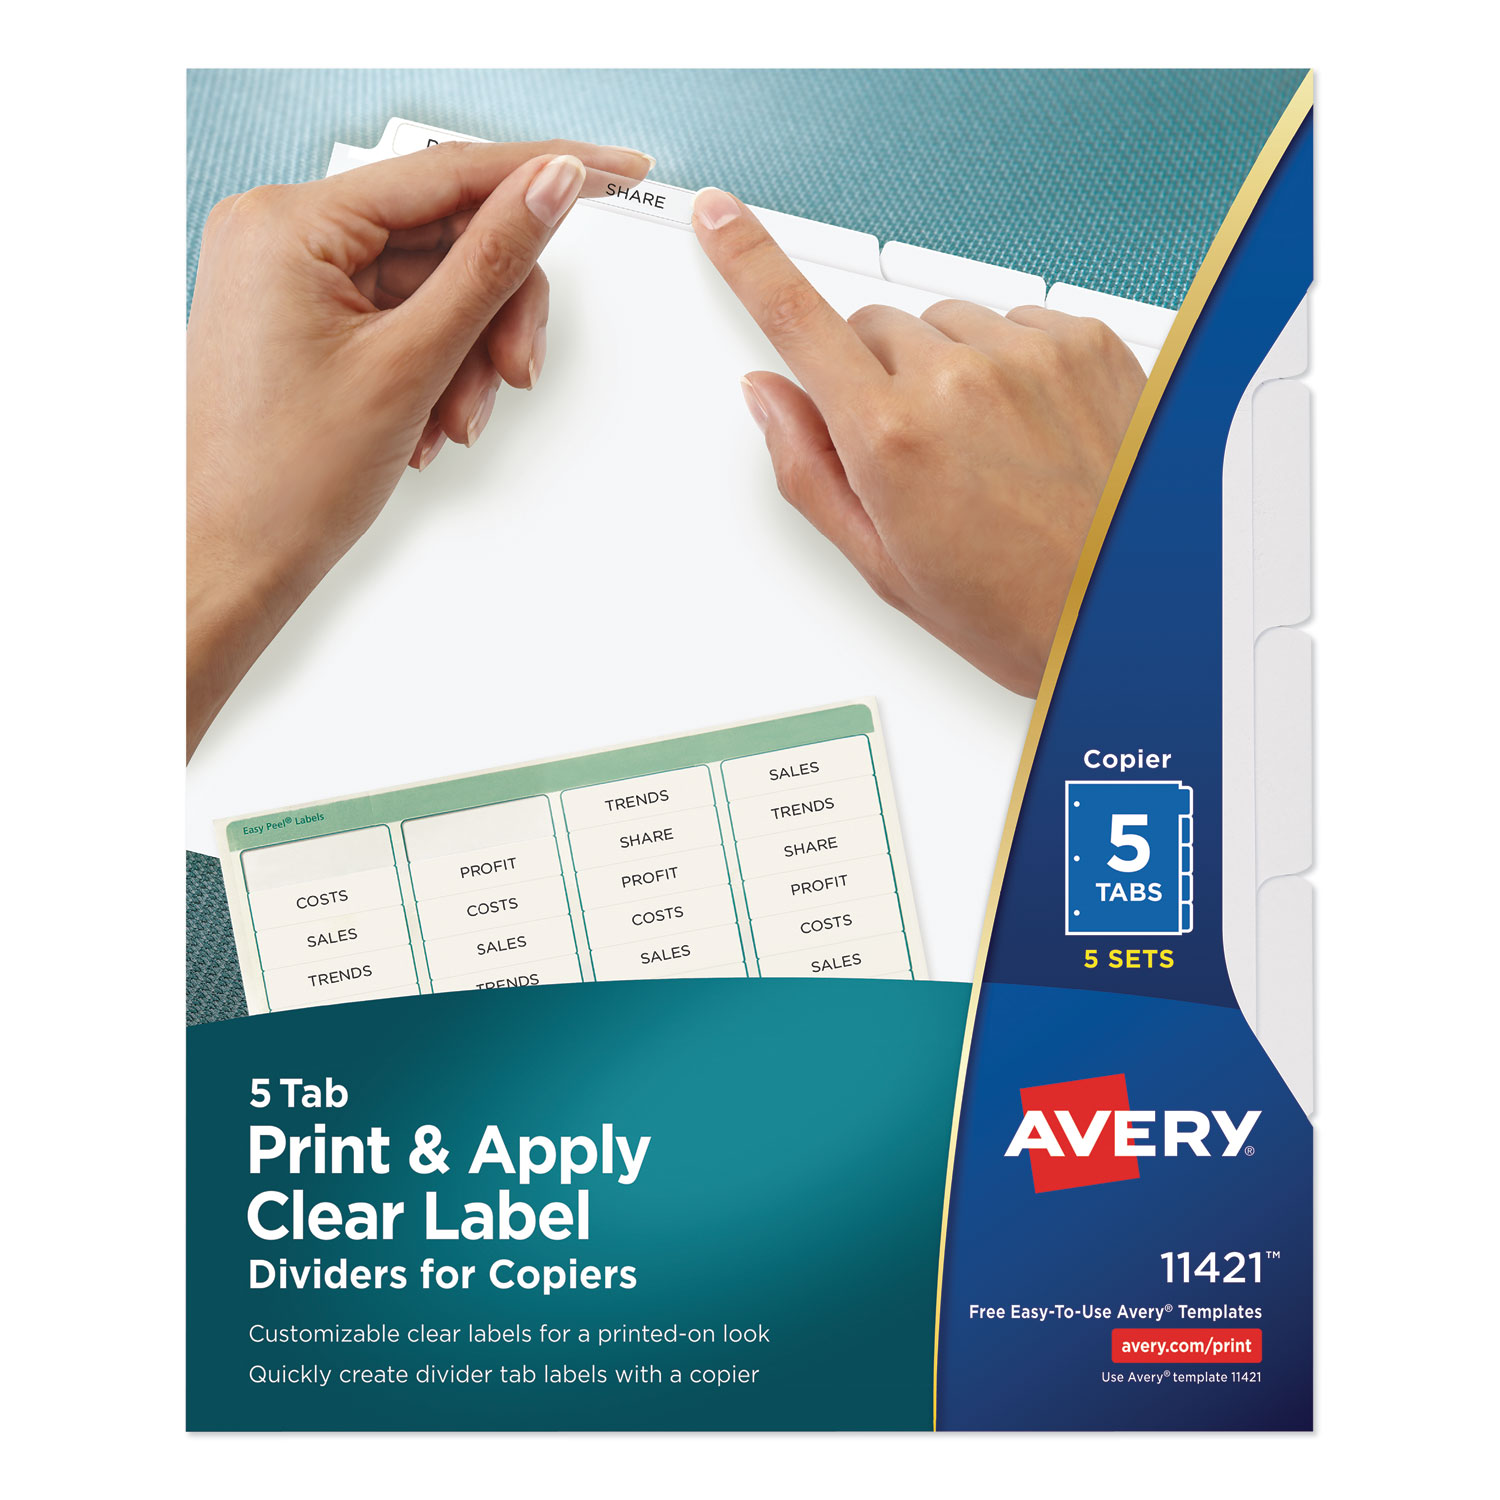 Print and Apply Index Maker Clear Label Dividers, Copiers, 5-Tab, Letter, 5 Sets